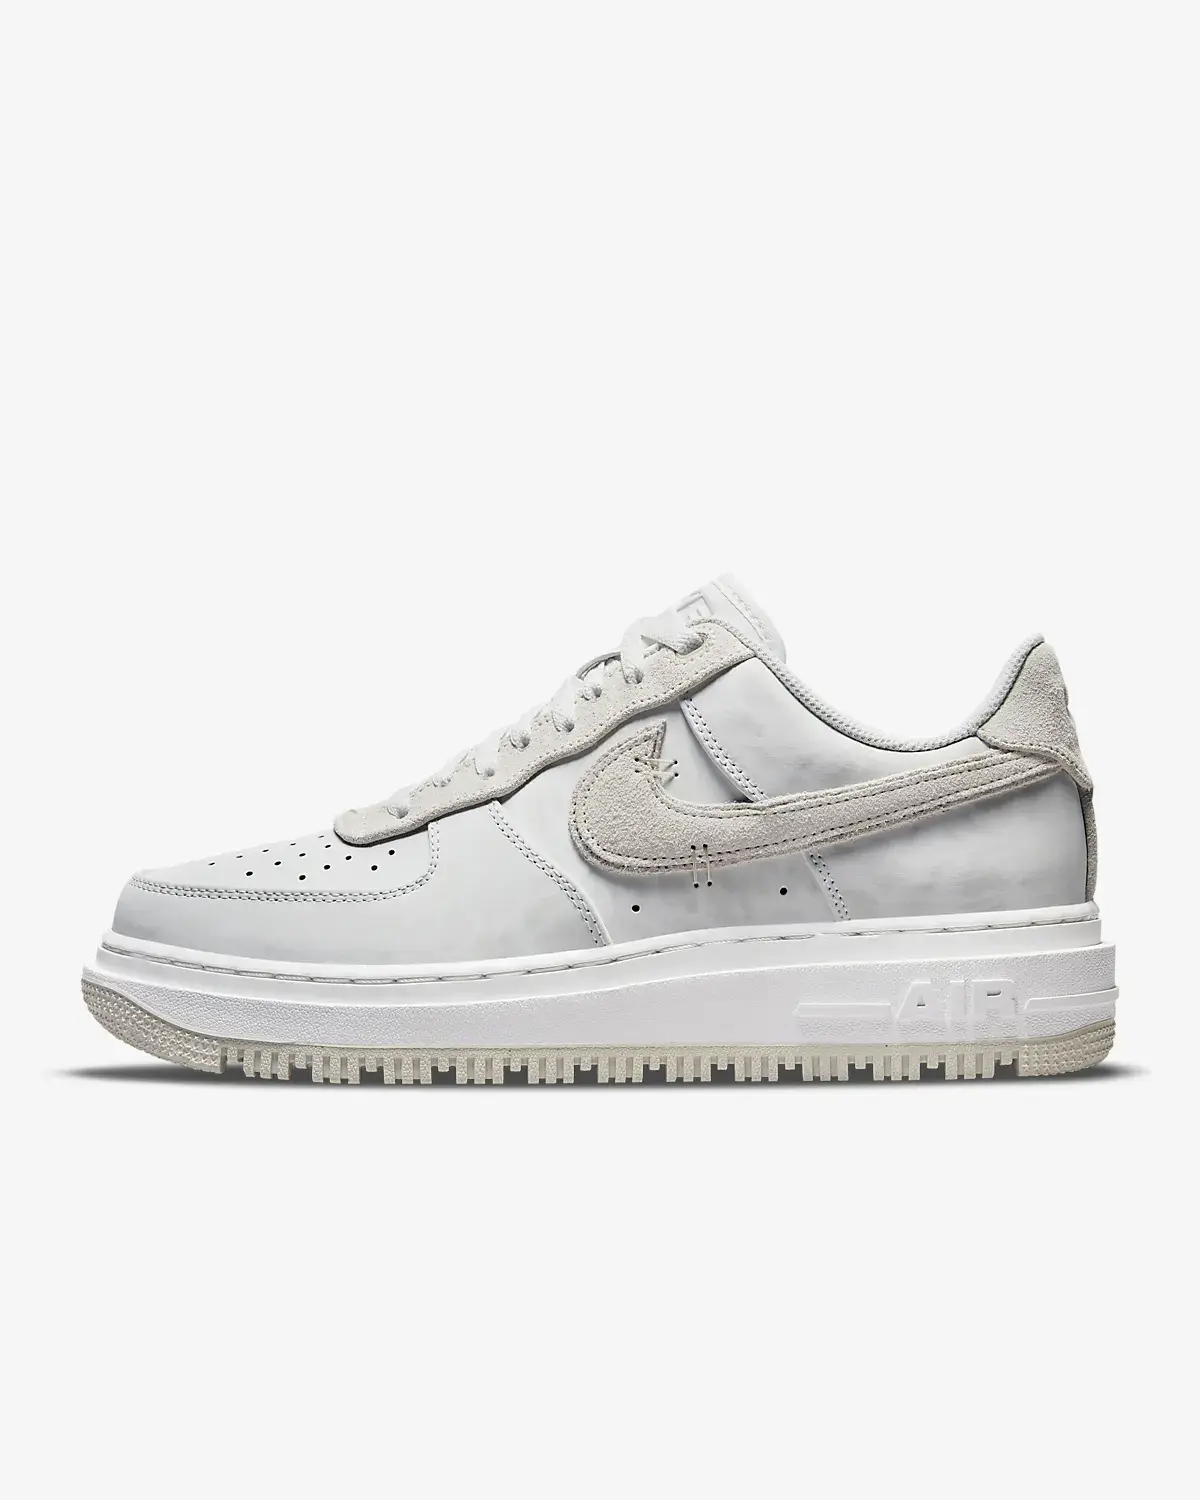 Nike Air Force 1 Luxe. 1